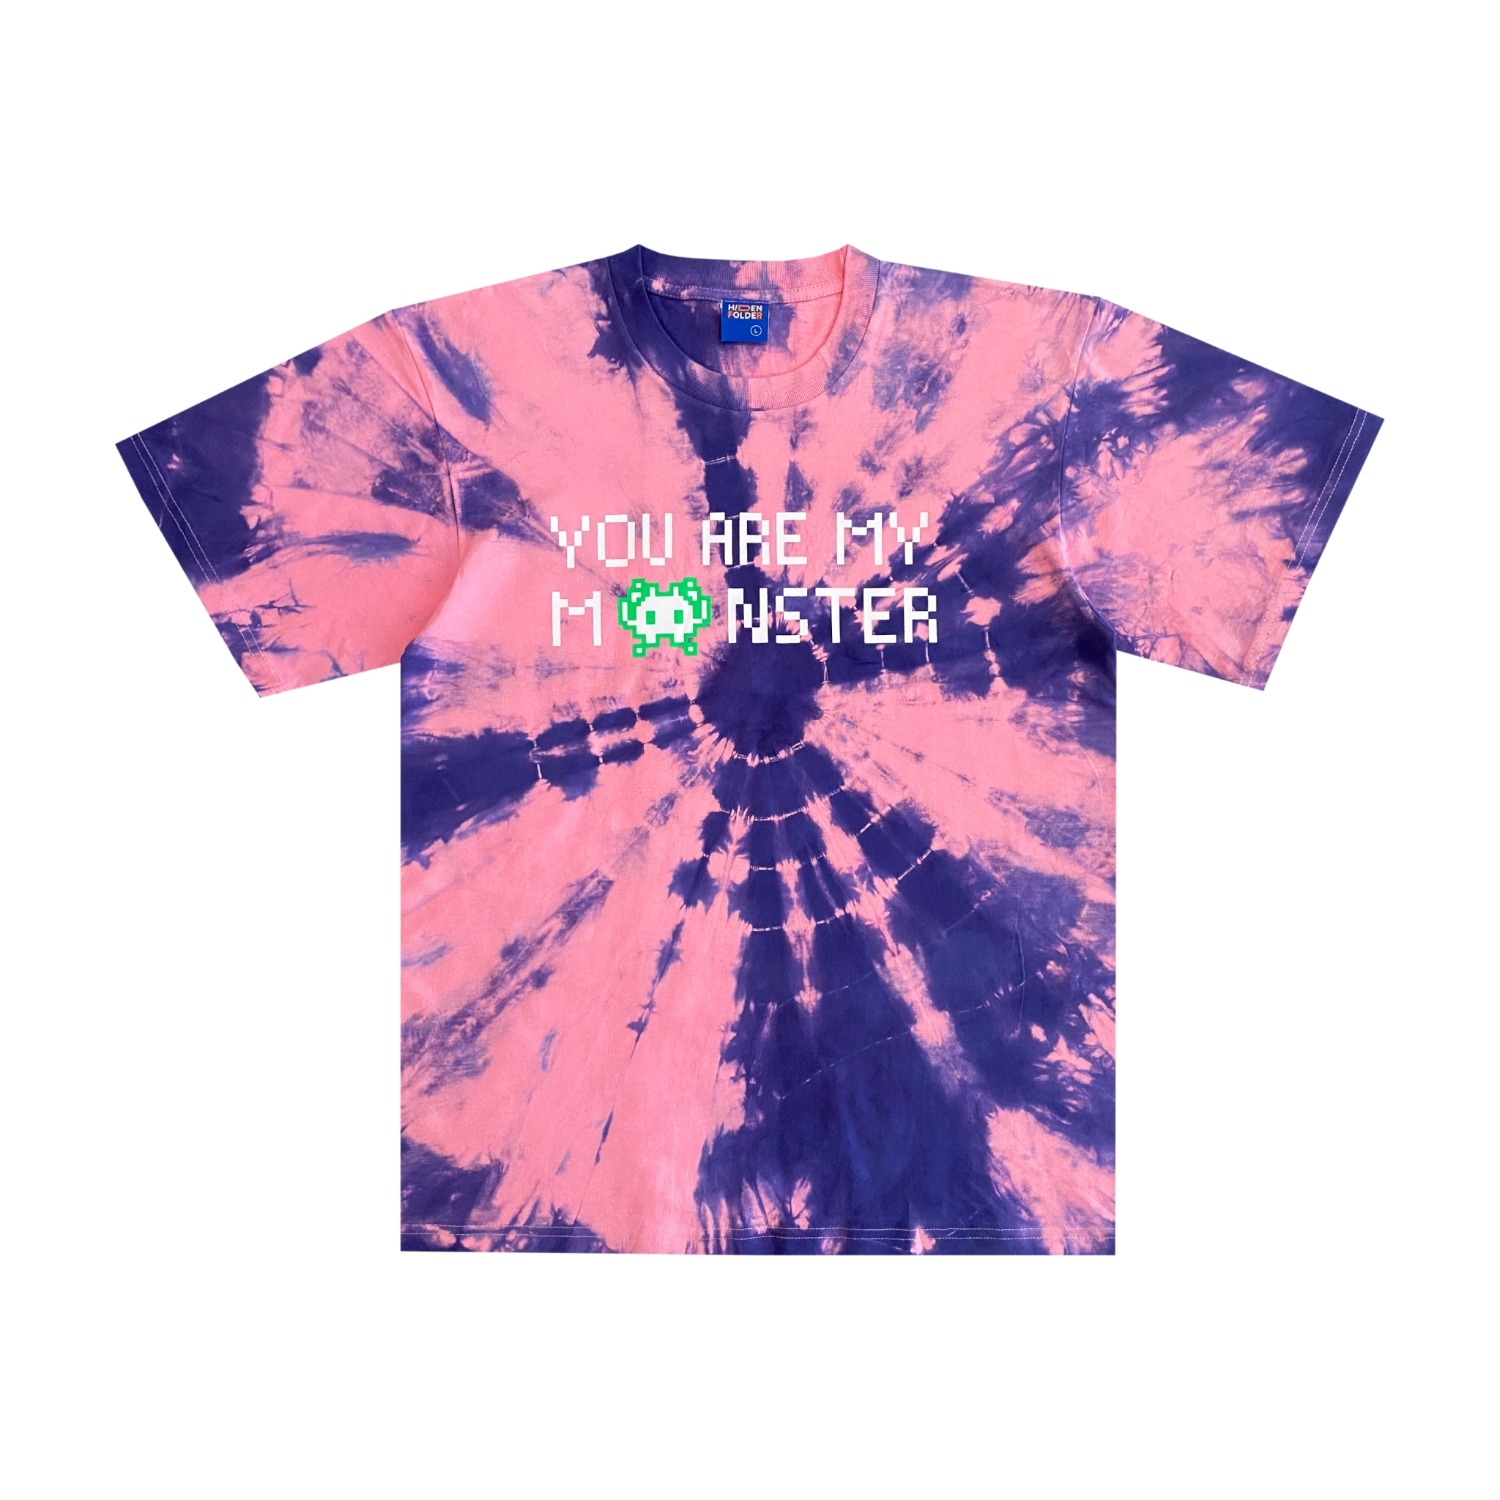 You are my Monster : Tie-dye